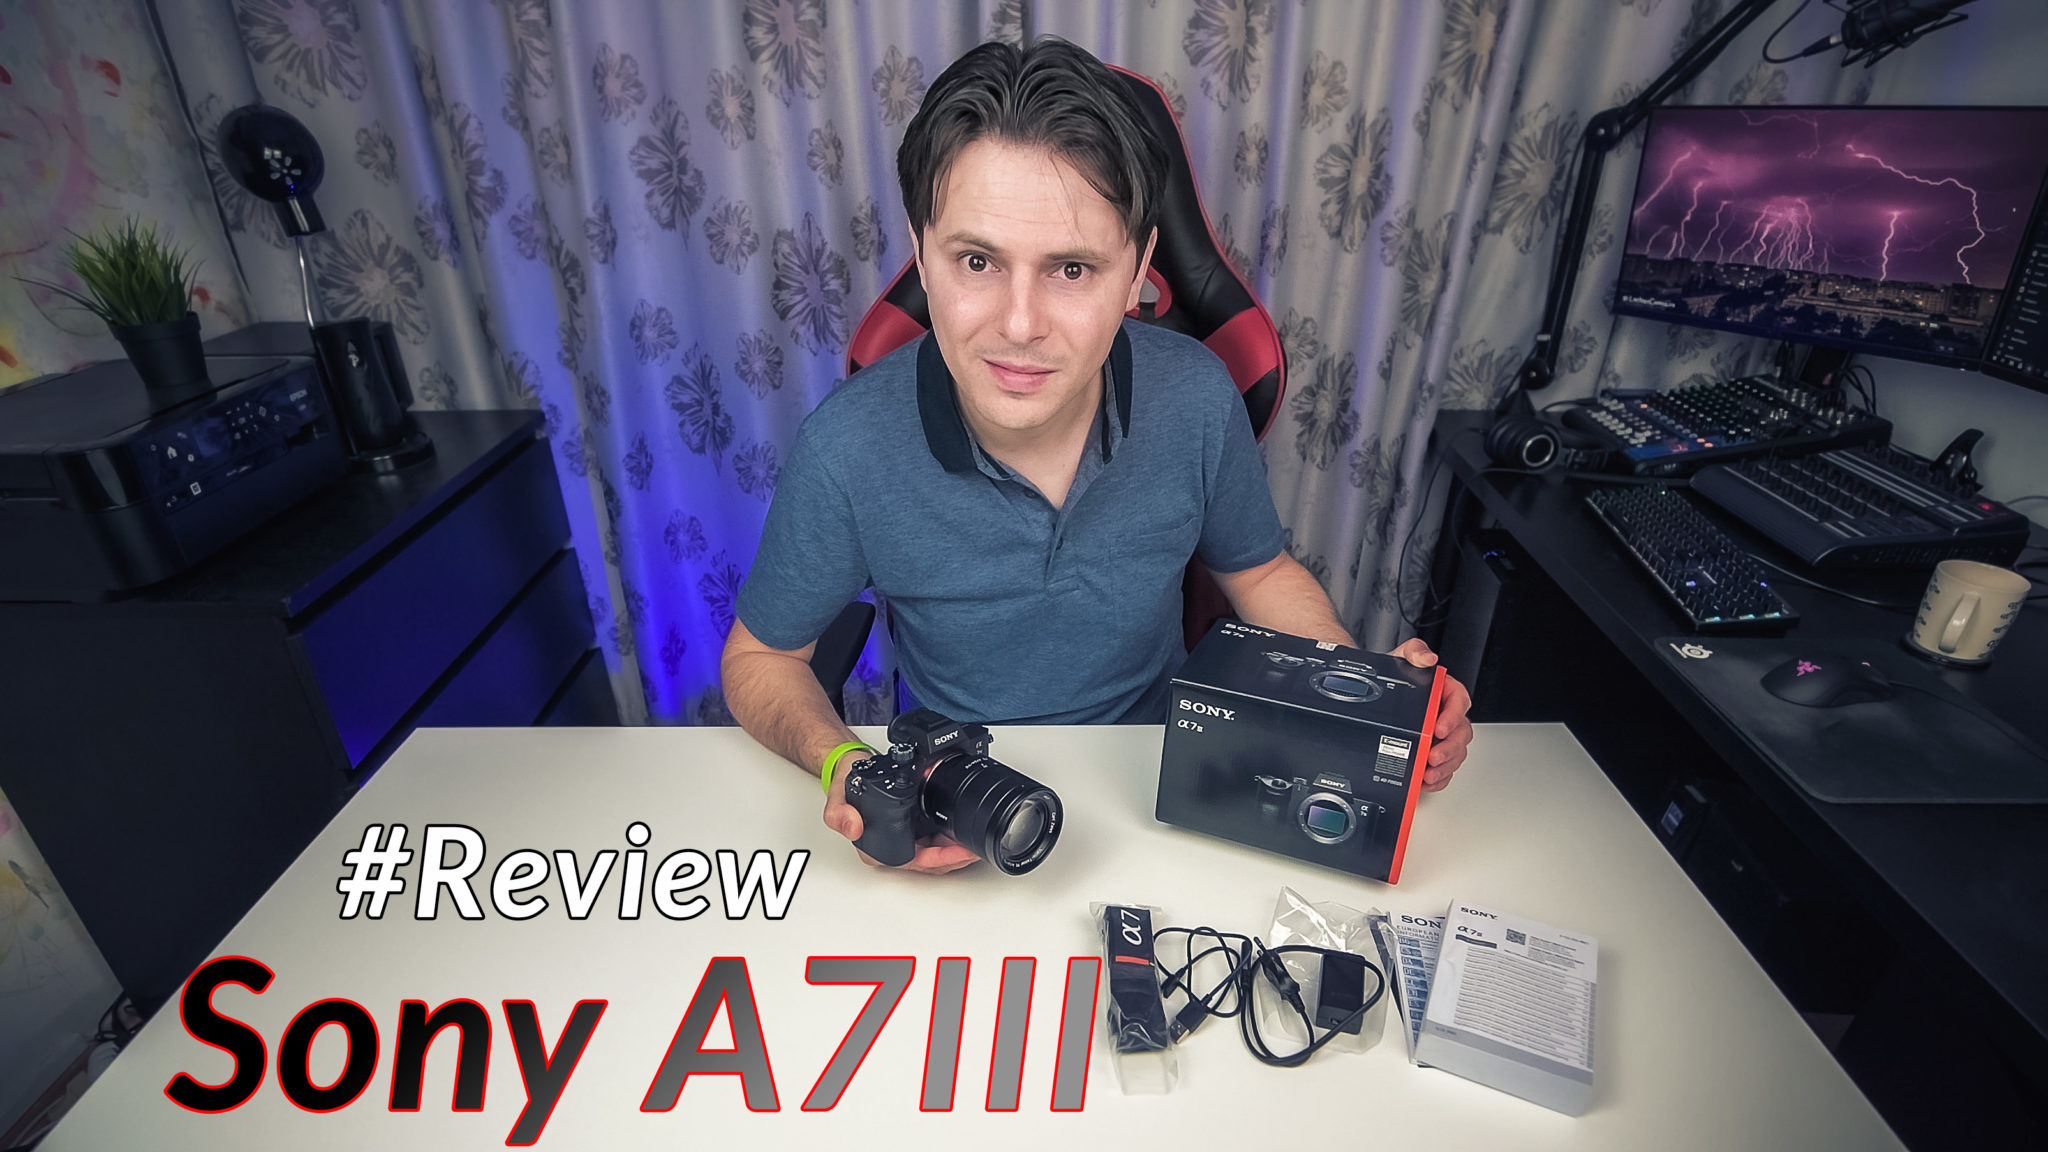  VIDEO: Unboxing și review Sony A7 III